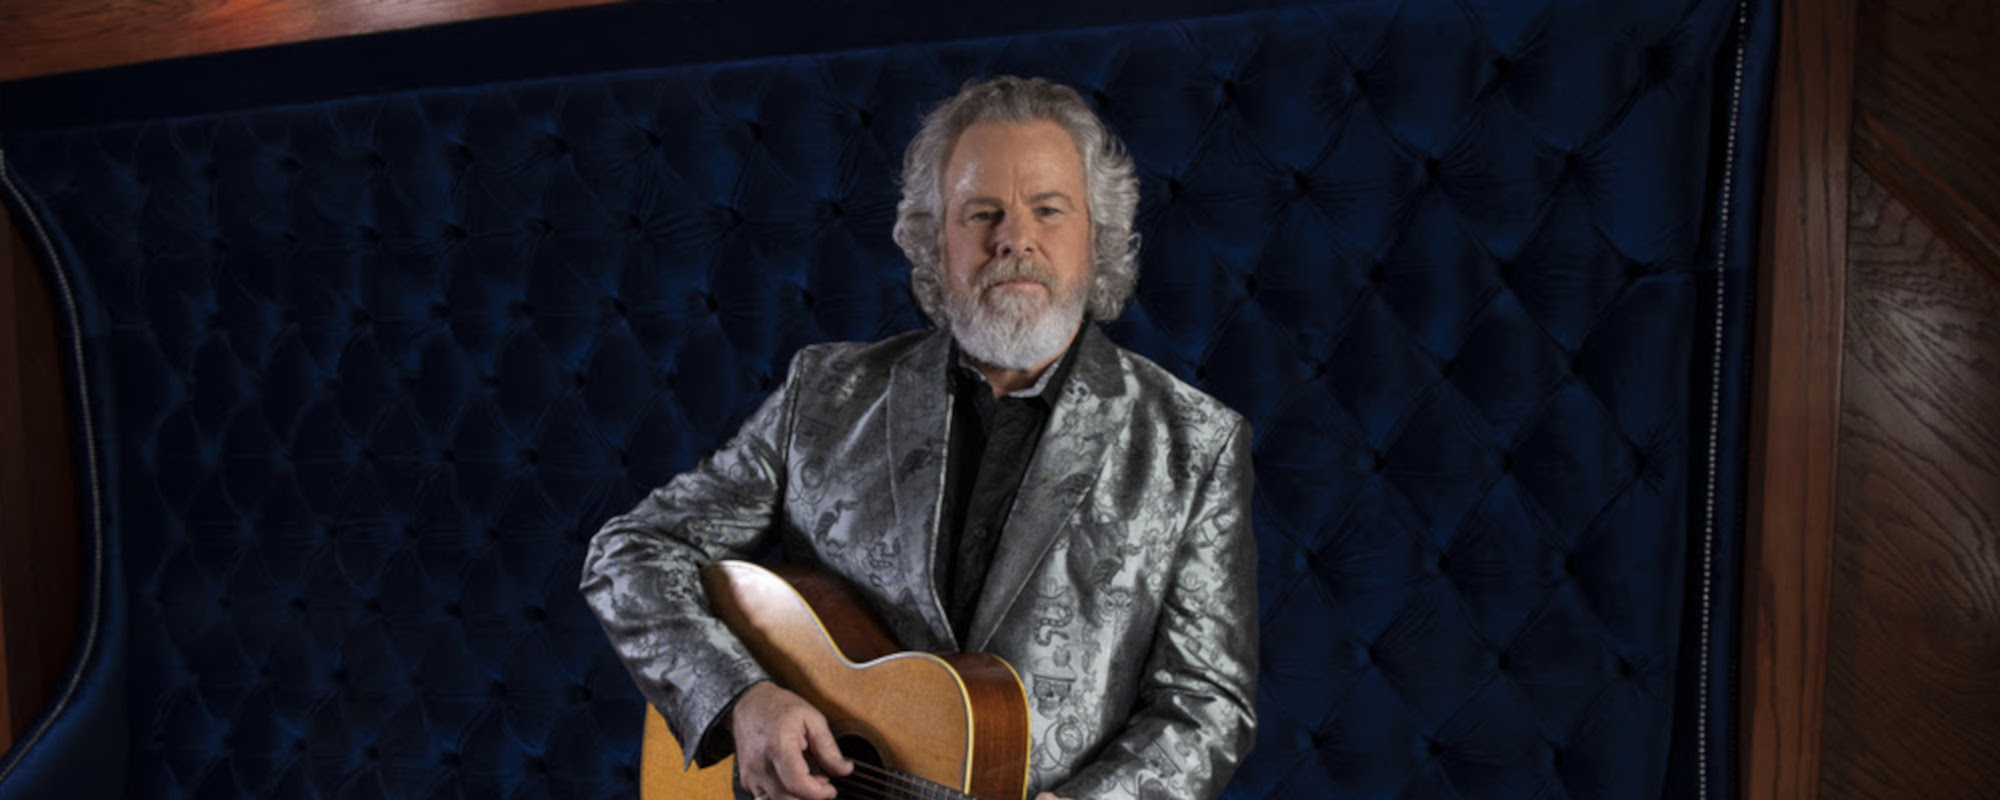 Robert Earl Keen Announces Retirement from Touring and Performing Publicly